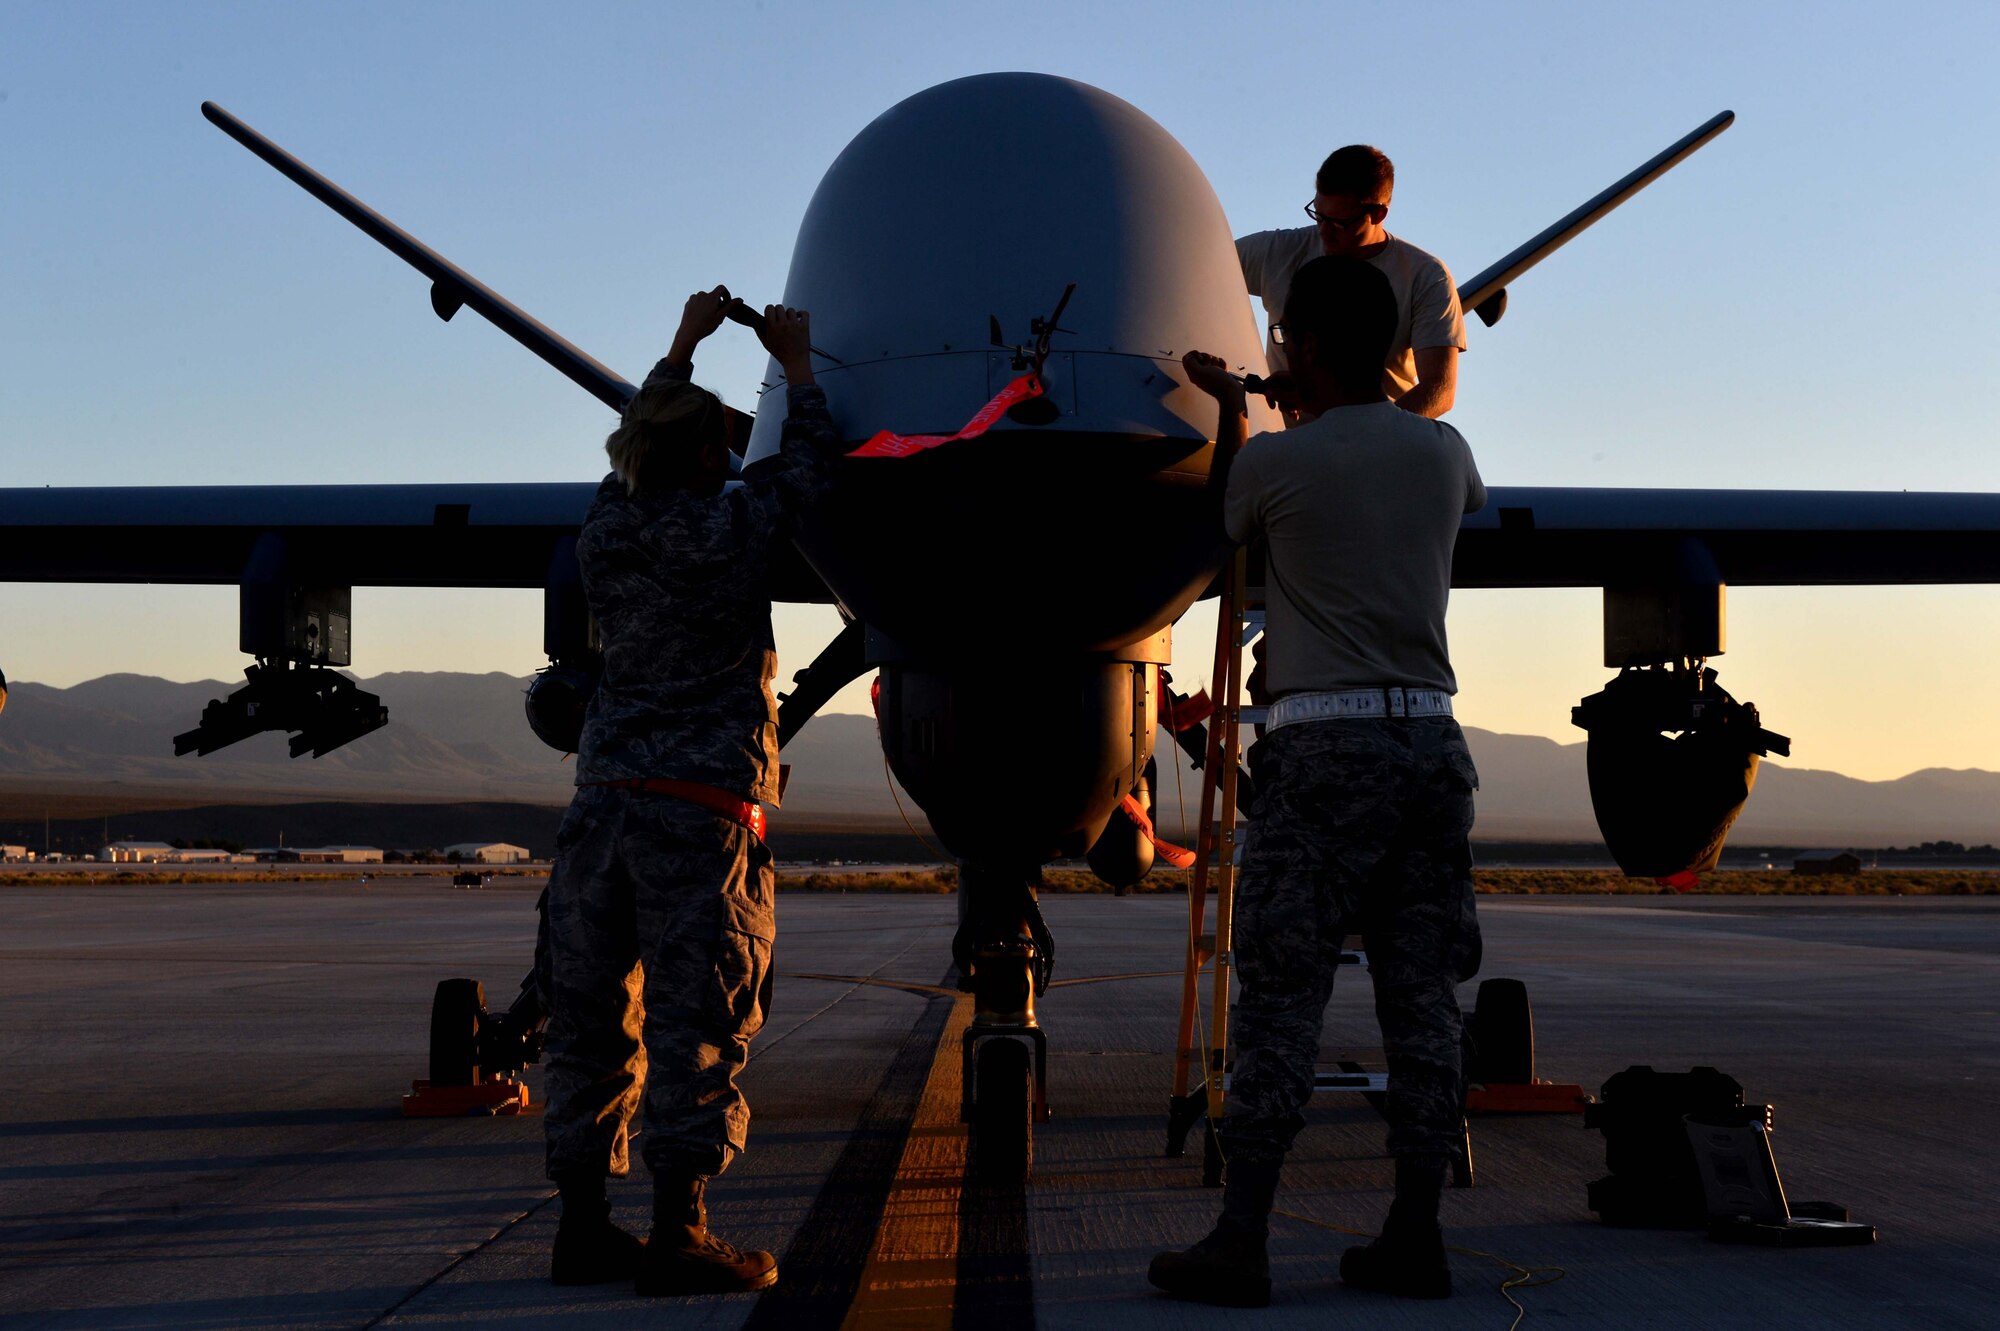 Airmen from the 432nd Wing/ 432nd Air Expeditionary Wing perform maintenance on an MQ-9 Reaper in preparation to support Red Flag 16-3 July 20, 2016, at Creech Air Force Base, Nevada. The exercise incorporates a wide range of training for air, space, and cyber systems that prepare Airmen for future operations. (U.S. Air Force photo by Airman 1st Class Kristan Campbell/Released)
